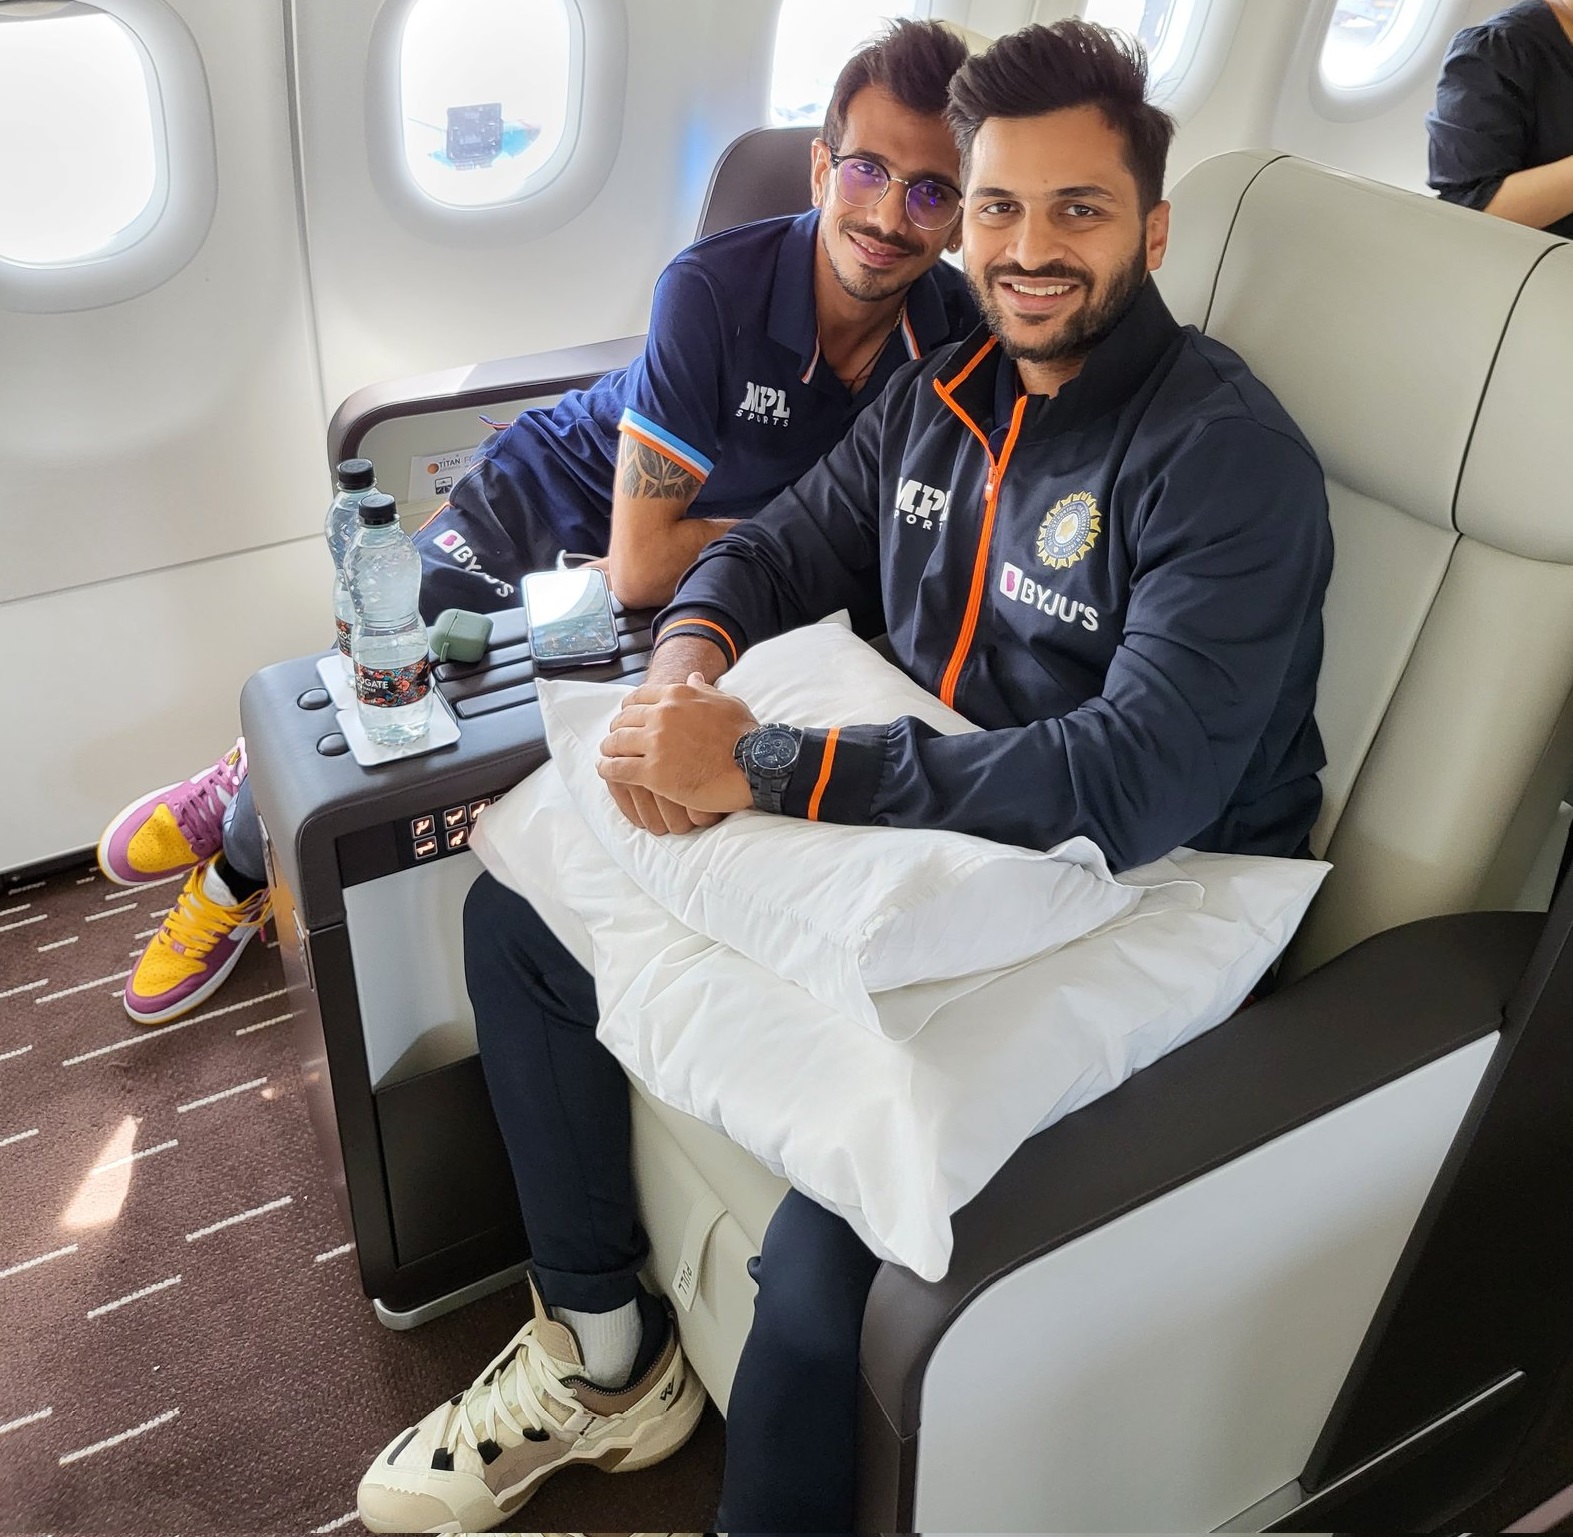 India West Indies Tour: Team India arrives in the Caribbean via charter flight, Rohit Sharma's short break: Catch up on live updates